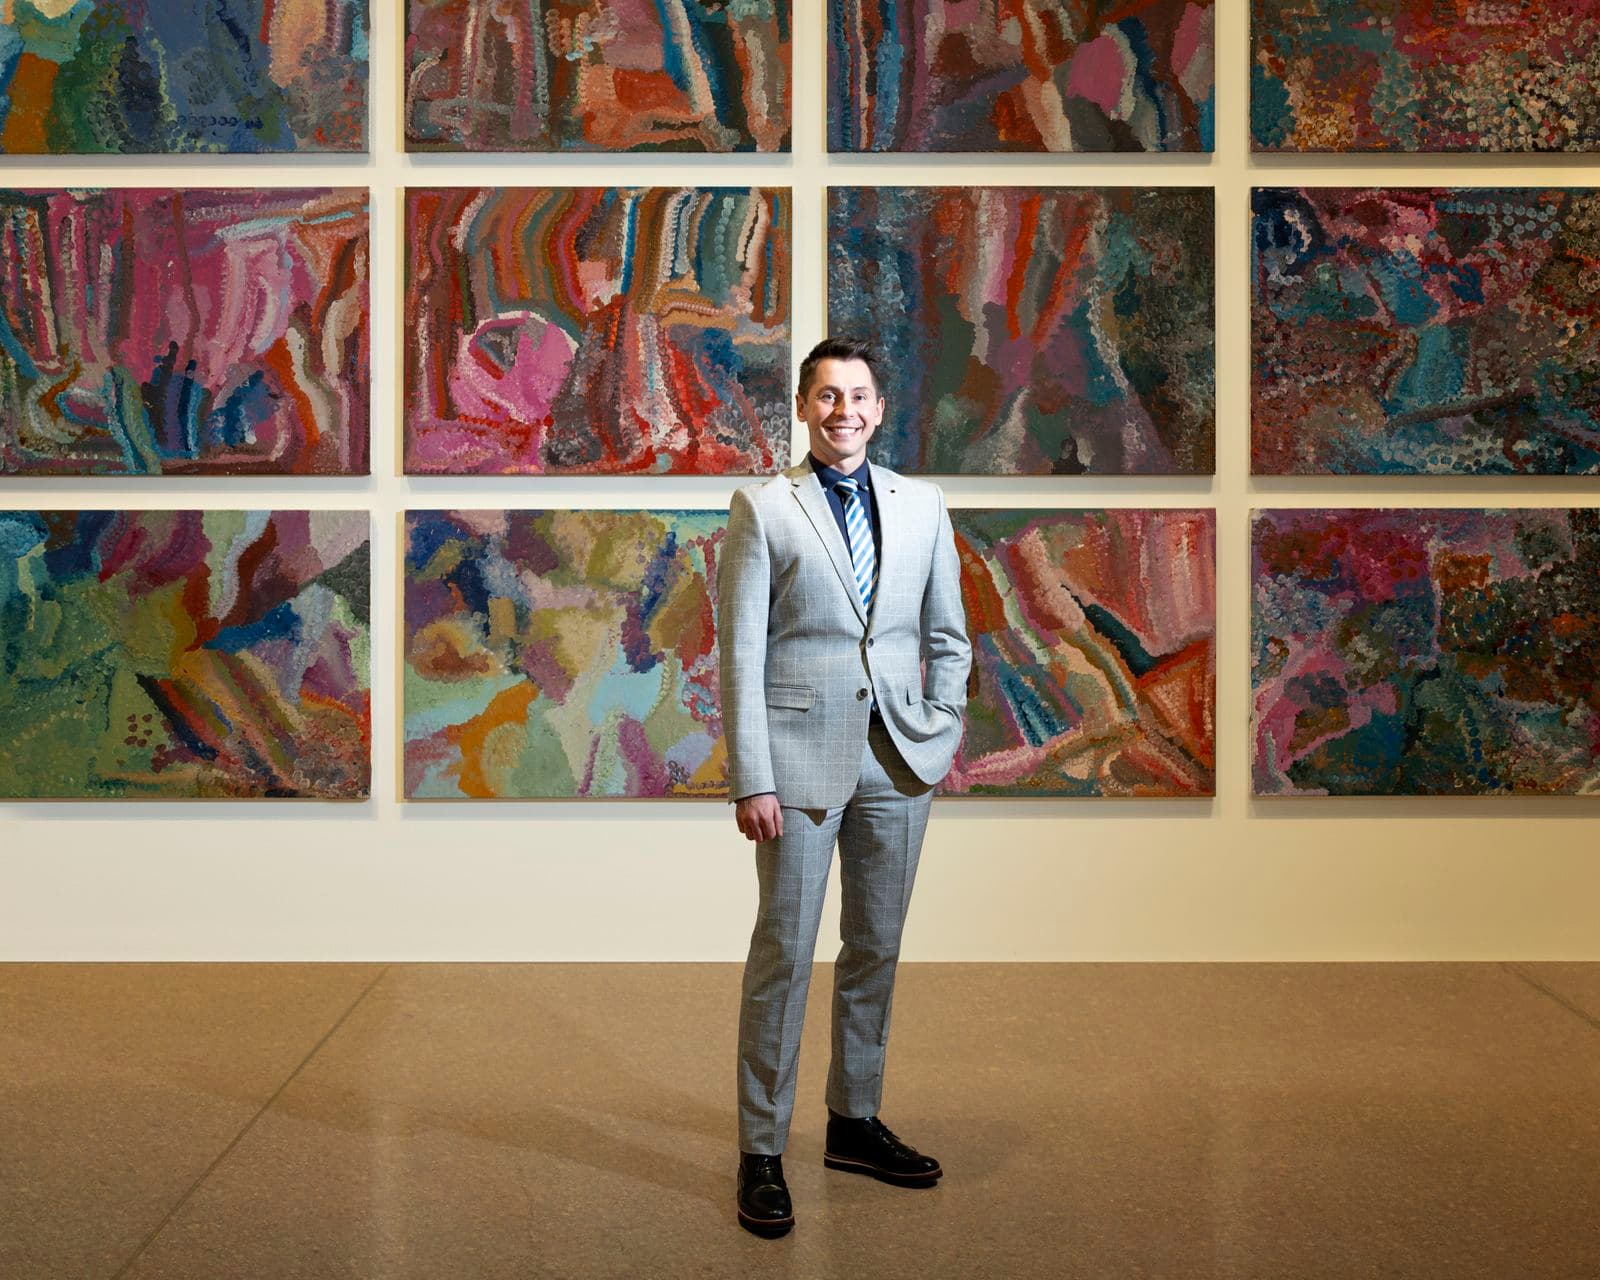 A man standing in front of a colourful work of art series